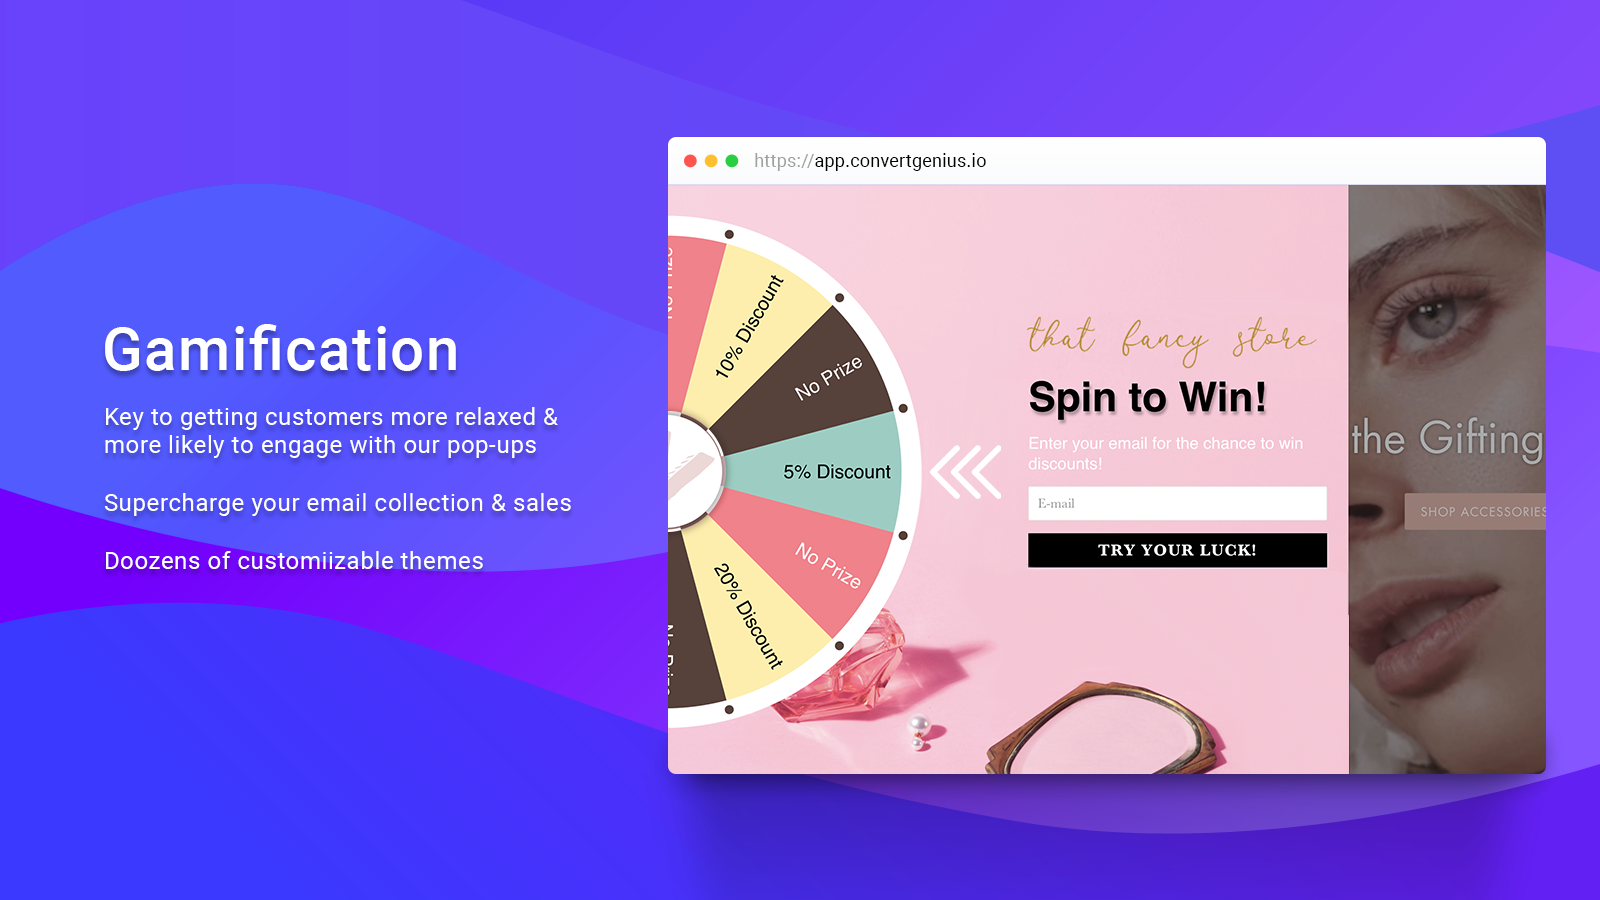 Convert Genius Popups - Gamification - Spin to Win